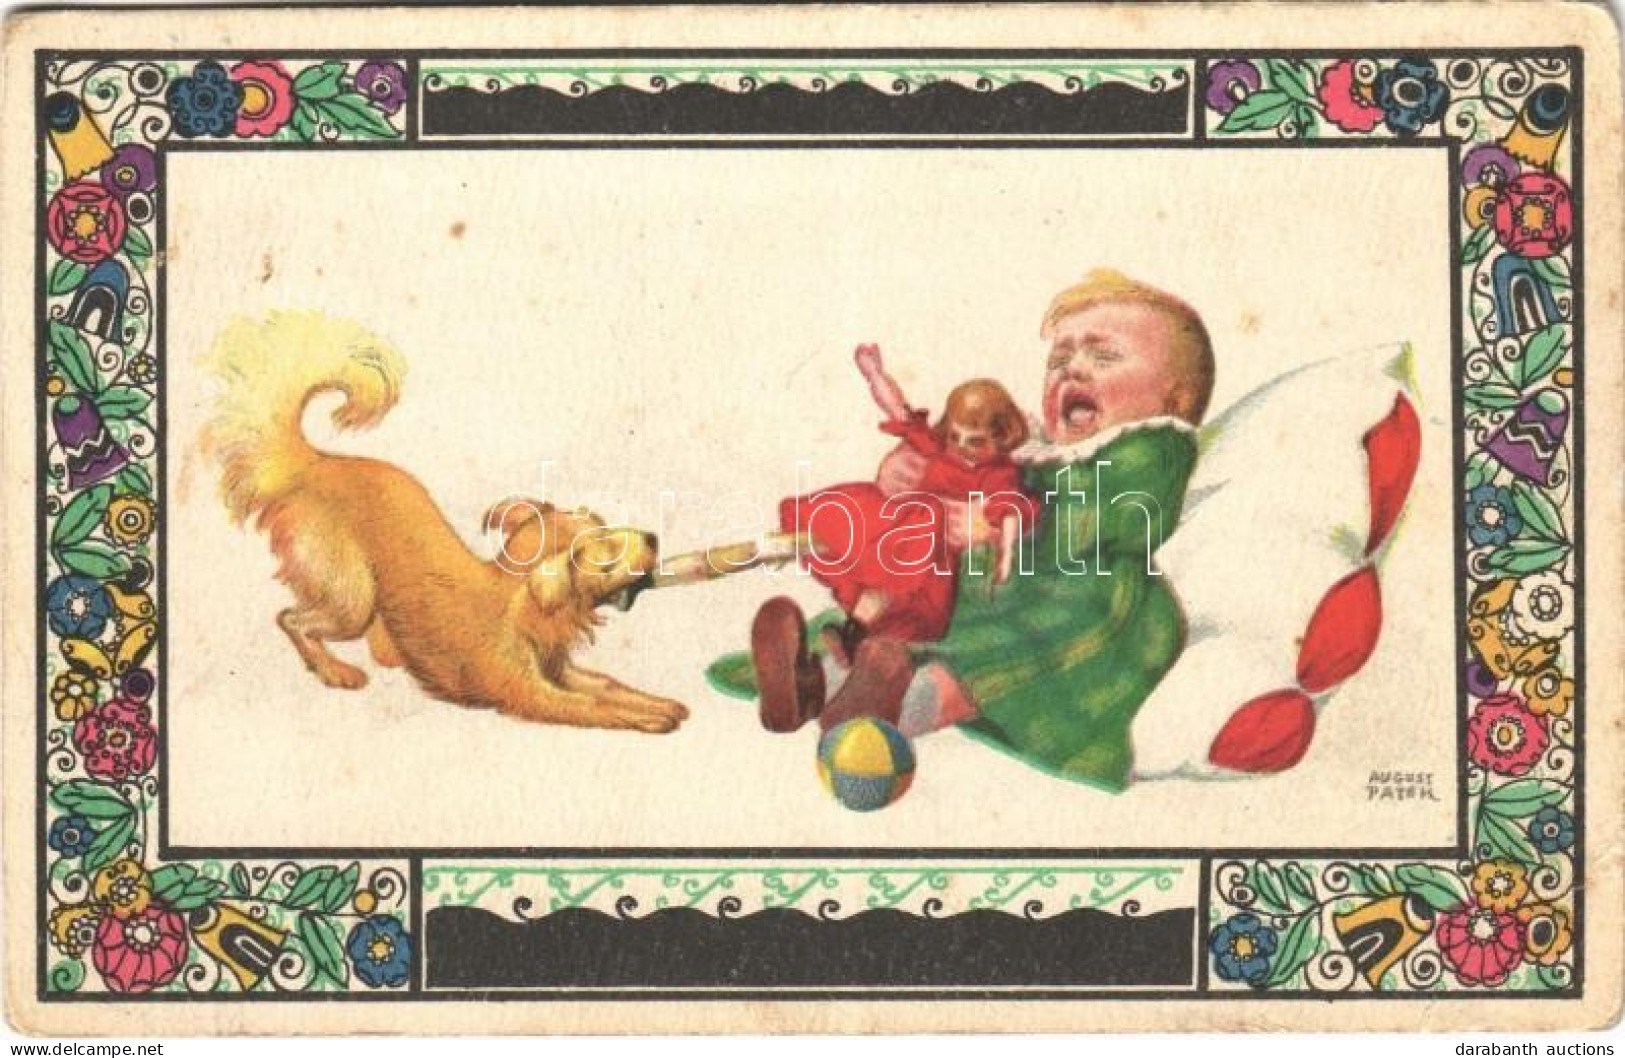 T3 1917 Crying Child With Dog And Toy. Children Art Postcard. B.K.W.I. 587-6. S: August Patek (EB) - Unclassified